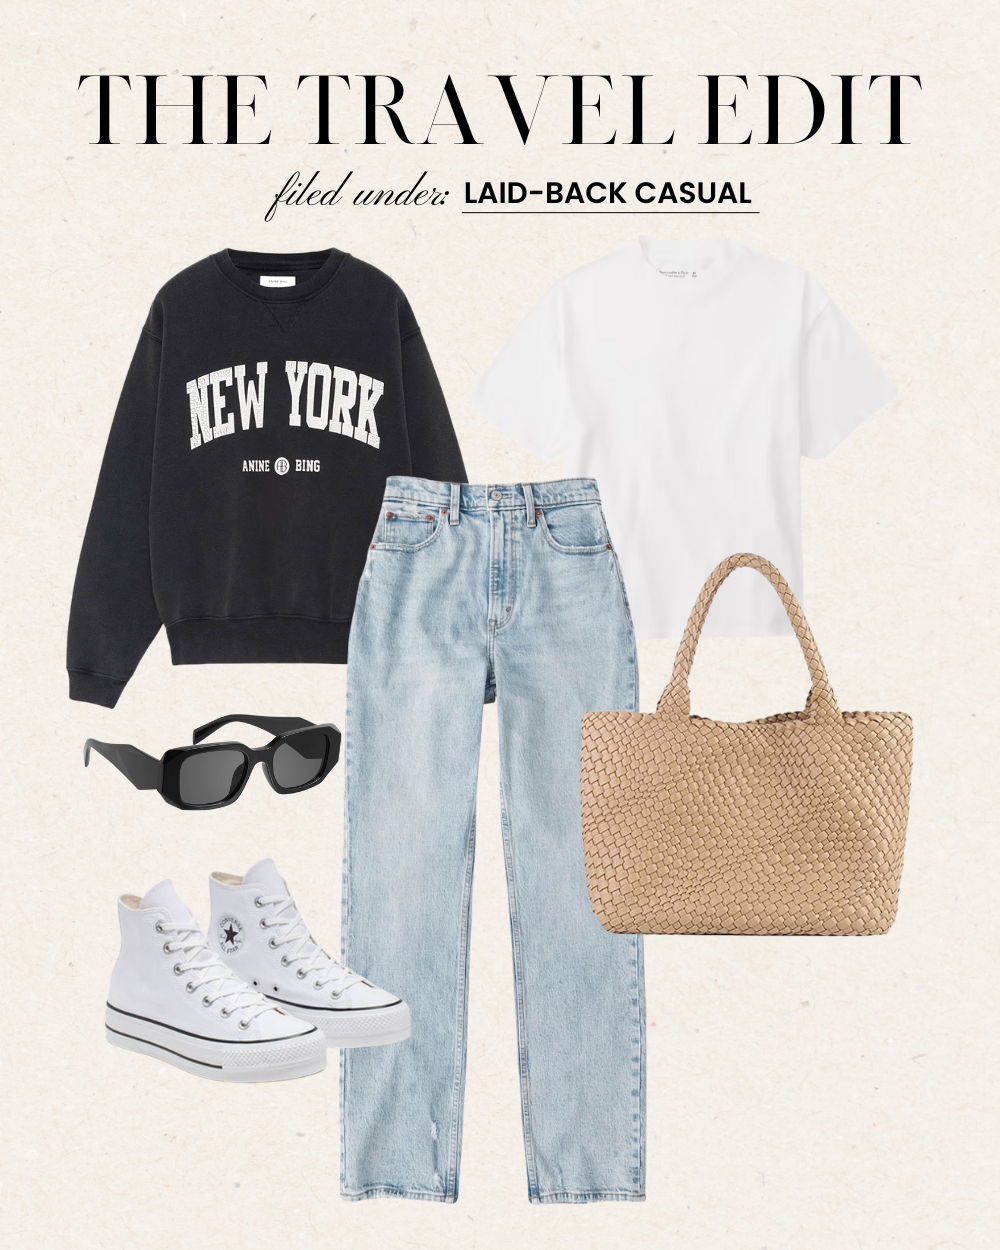 The Travel Edit: 5 Simple Travel Day Outfit Ideas